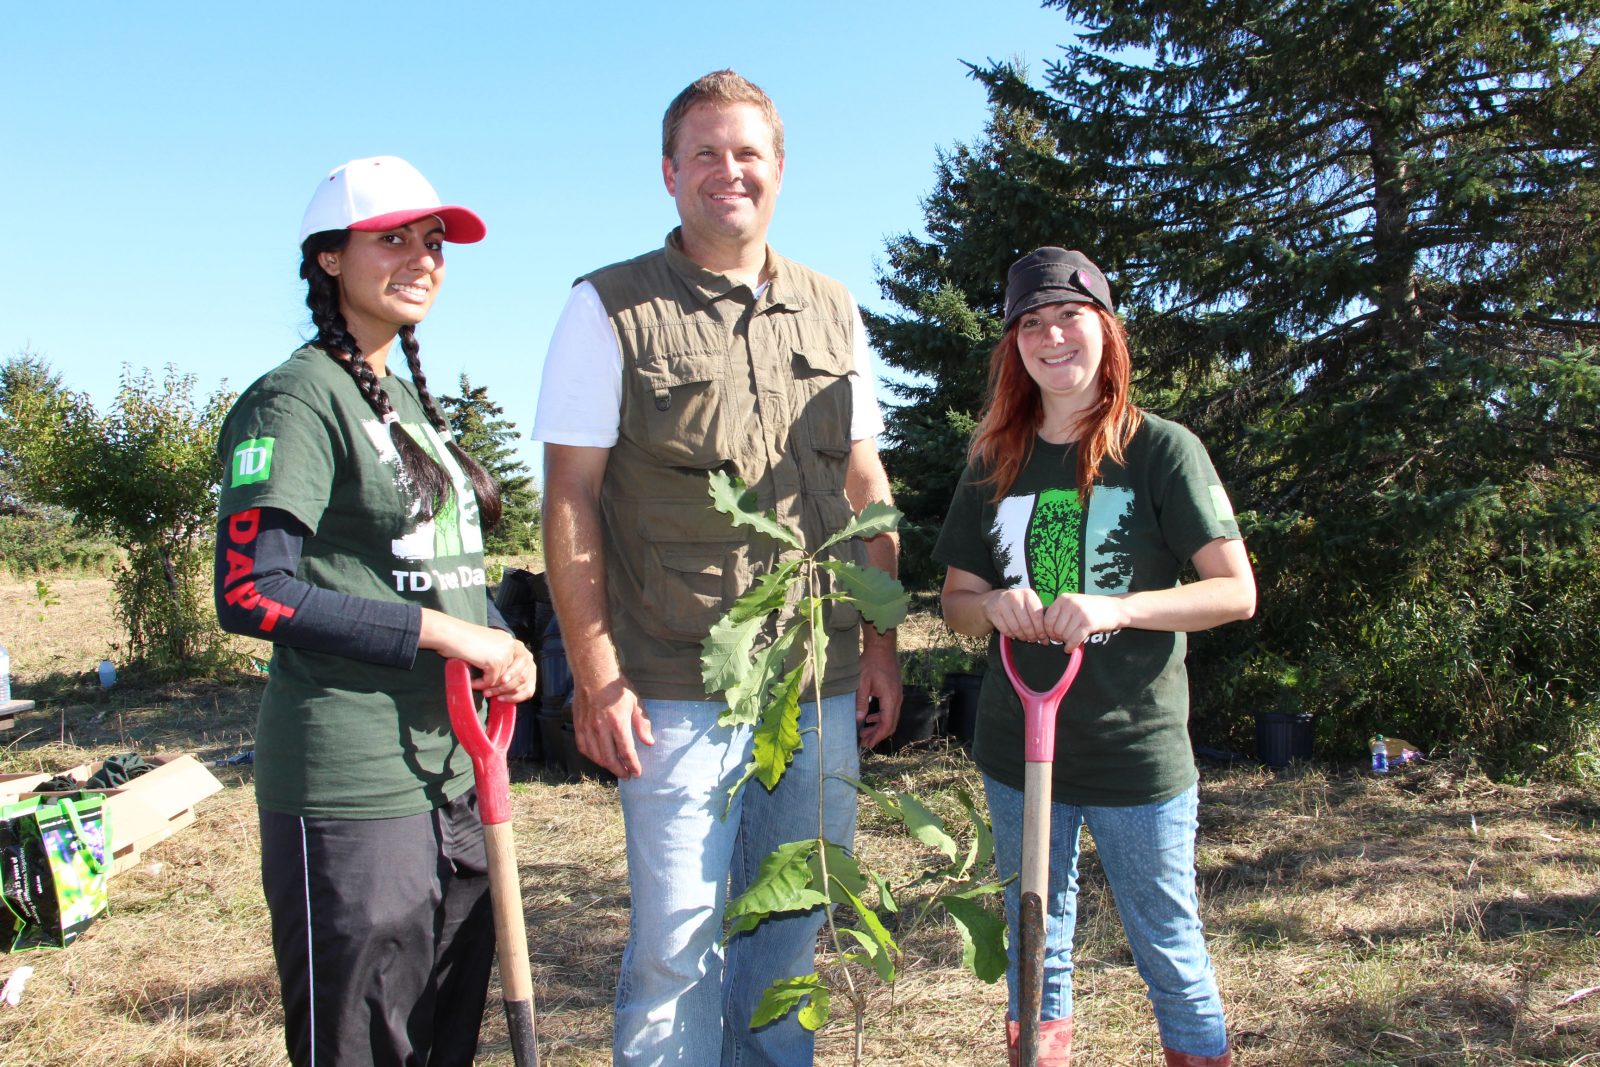 Fall is here, come plant trees with RRCA today